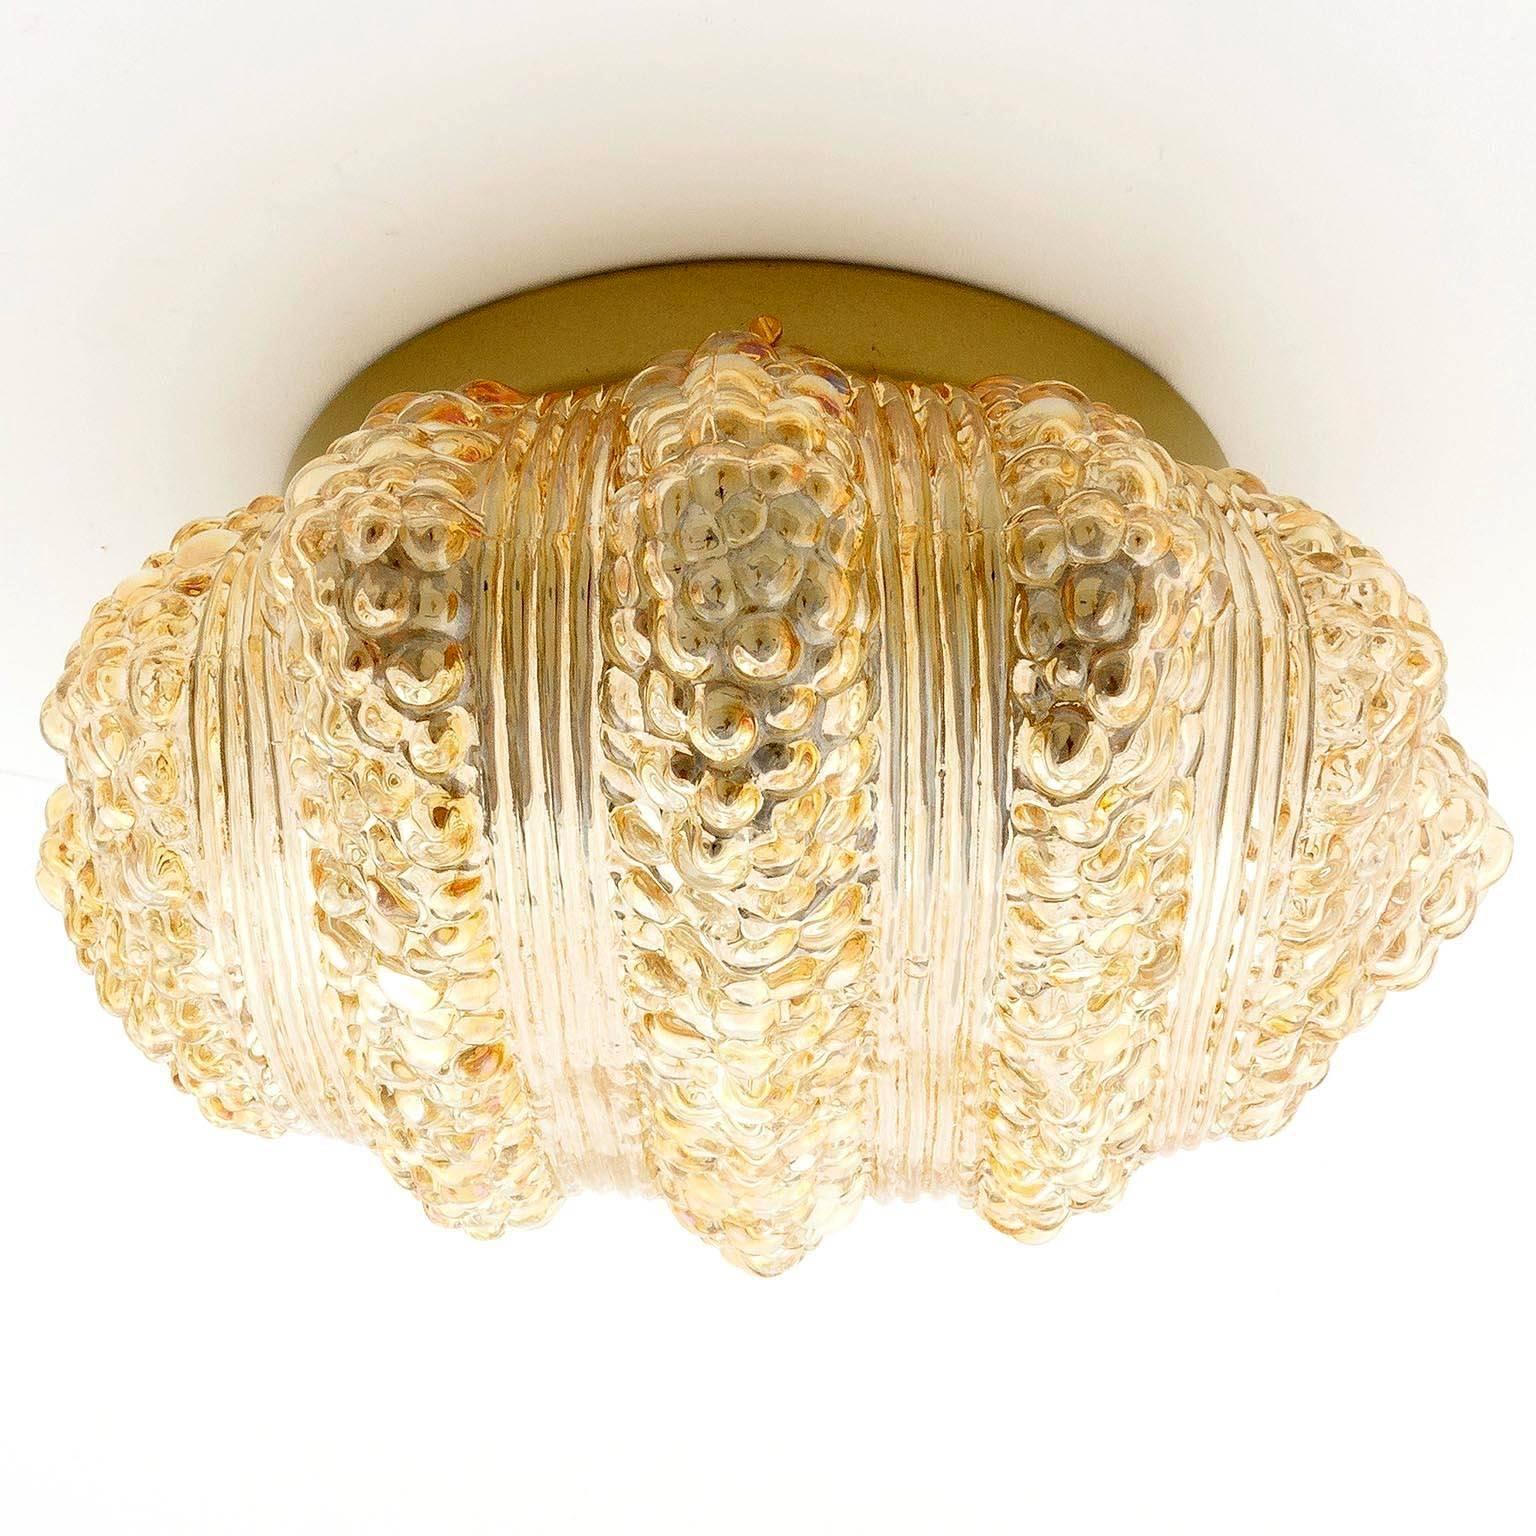 Painted Pair of Flush Mount Lights or Sconces, Amber Tone Bubble Glass, 1970